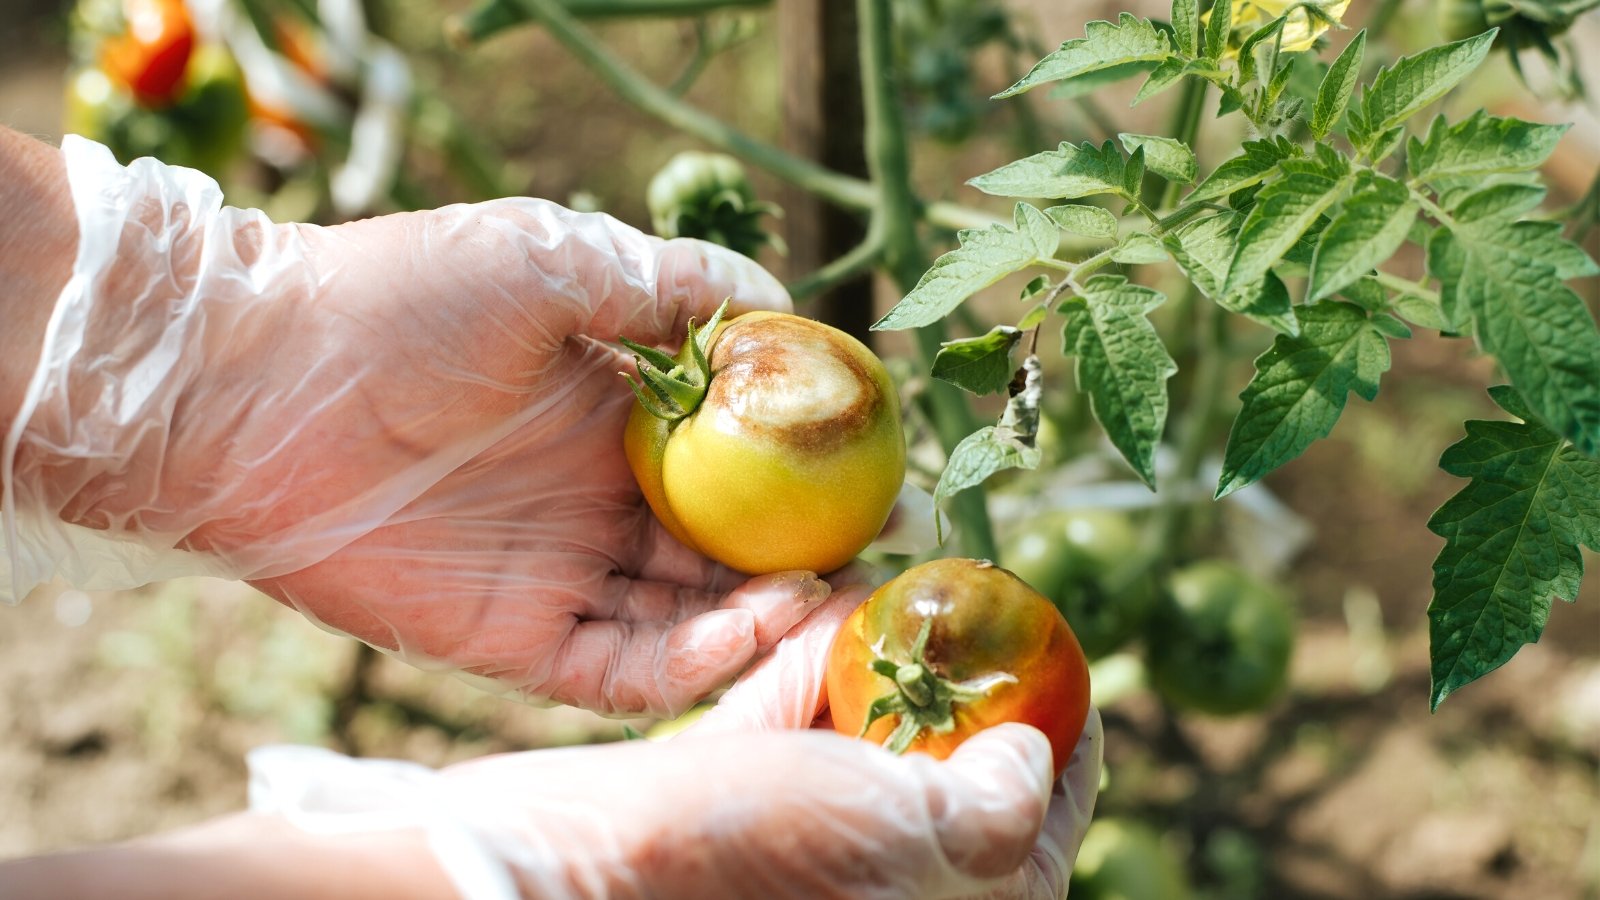 late blight tomatoes